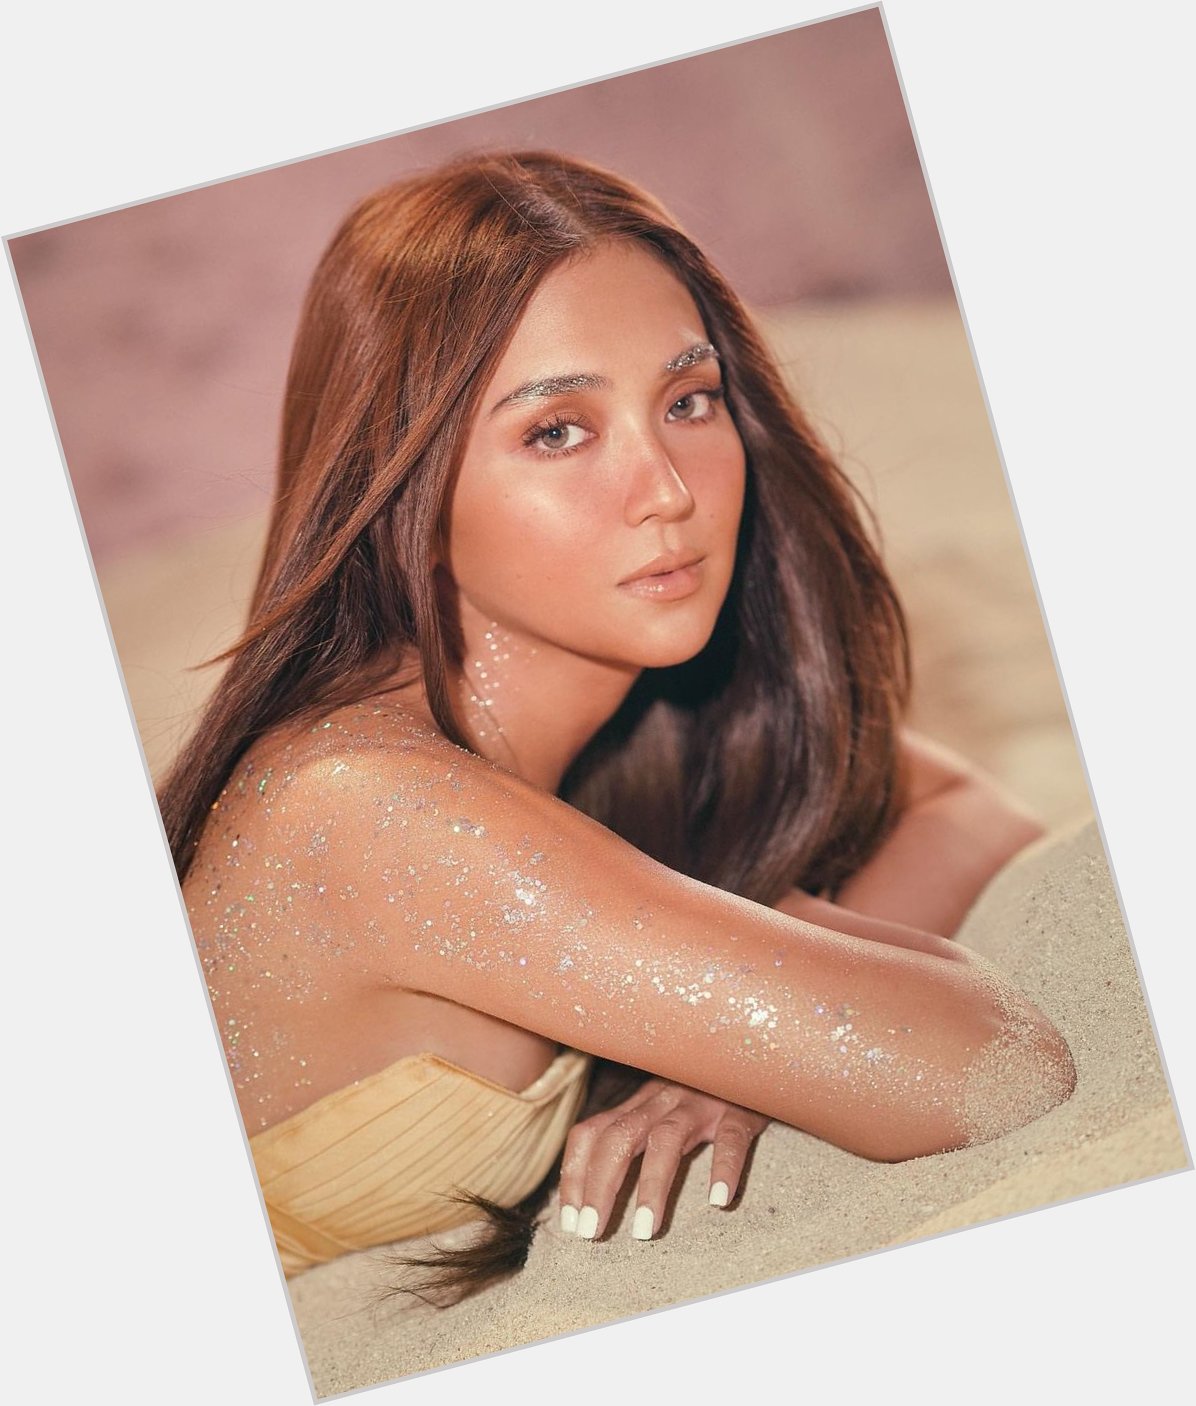 Happy birthday to the one and only, Kathryn Bernardo   